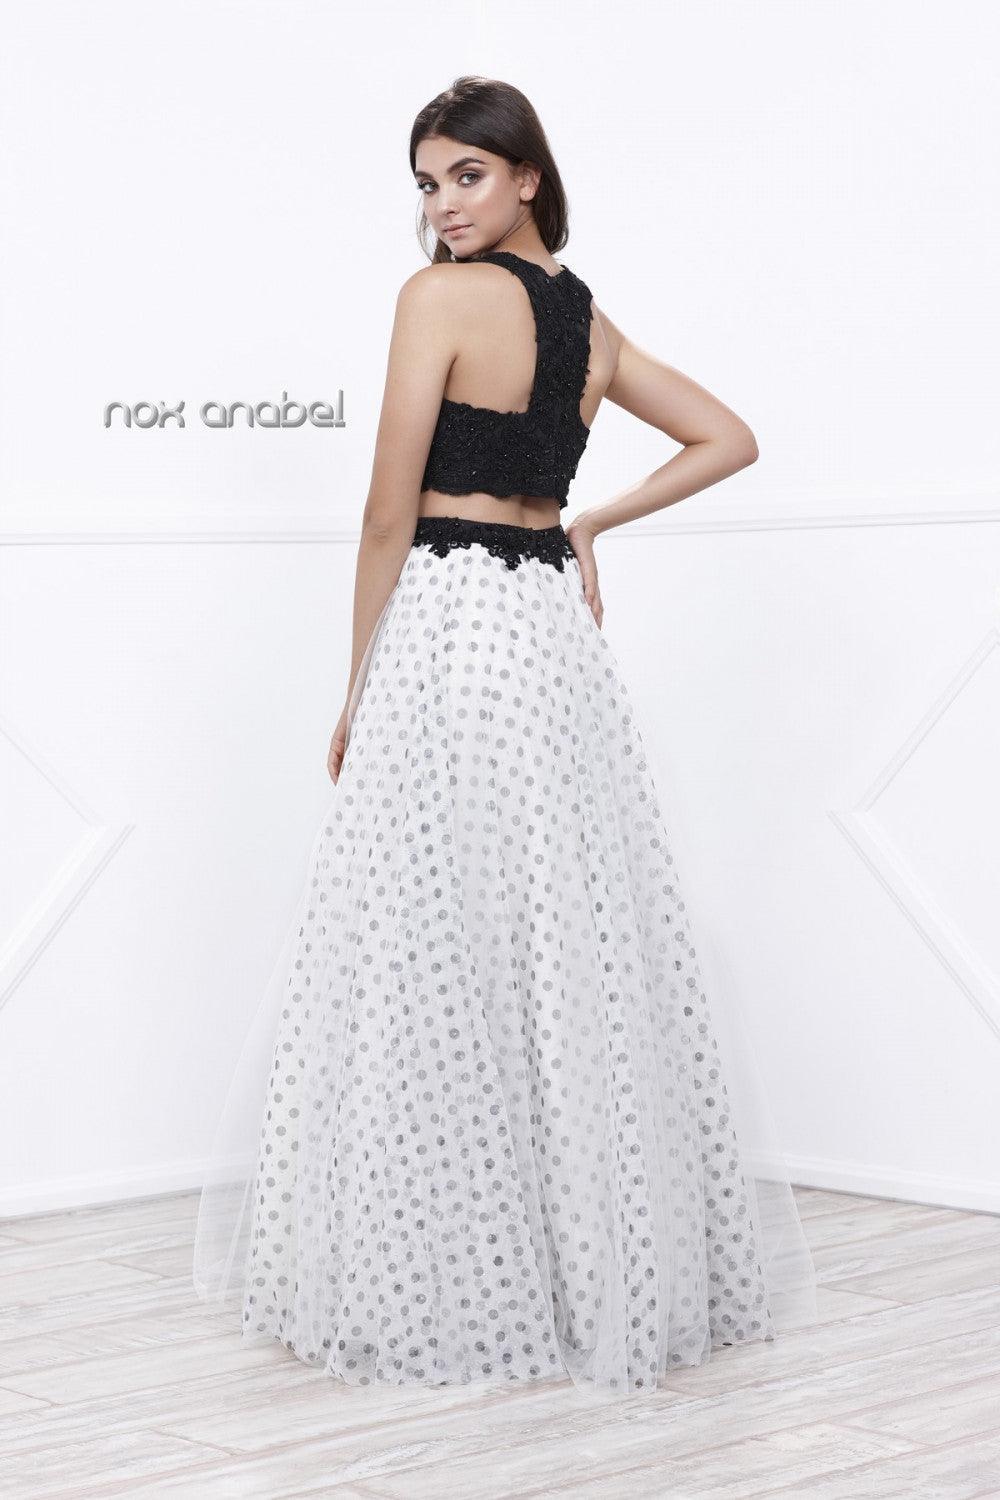 Long Two Piece Black White Prom Dress - The Dress Outlet Nox Anabel